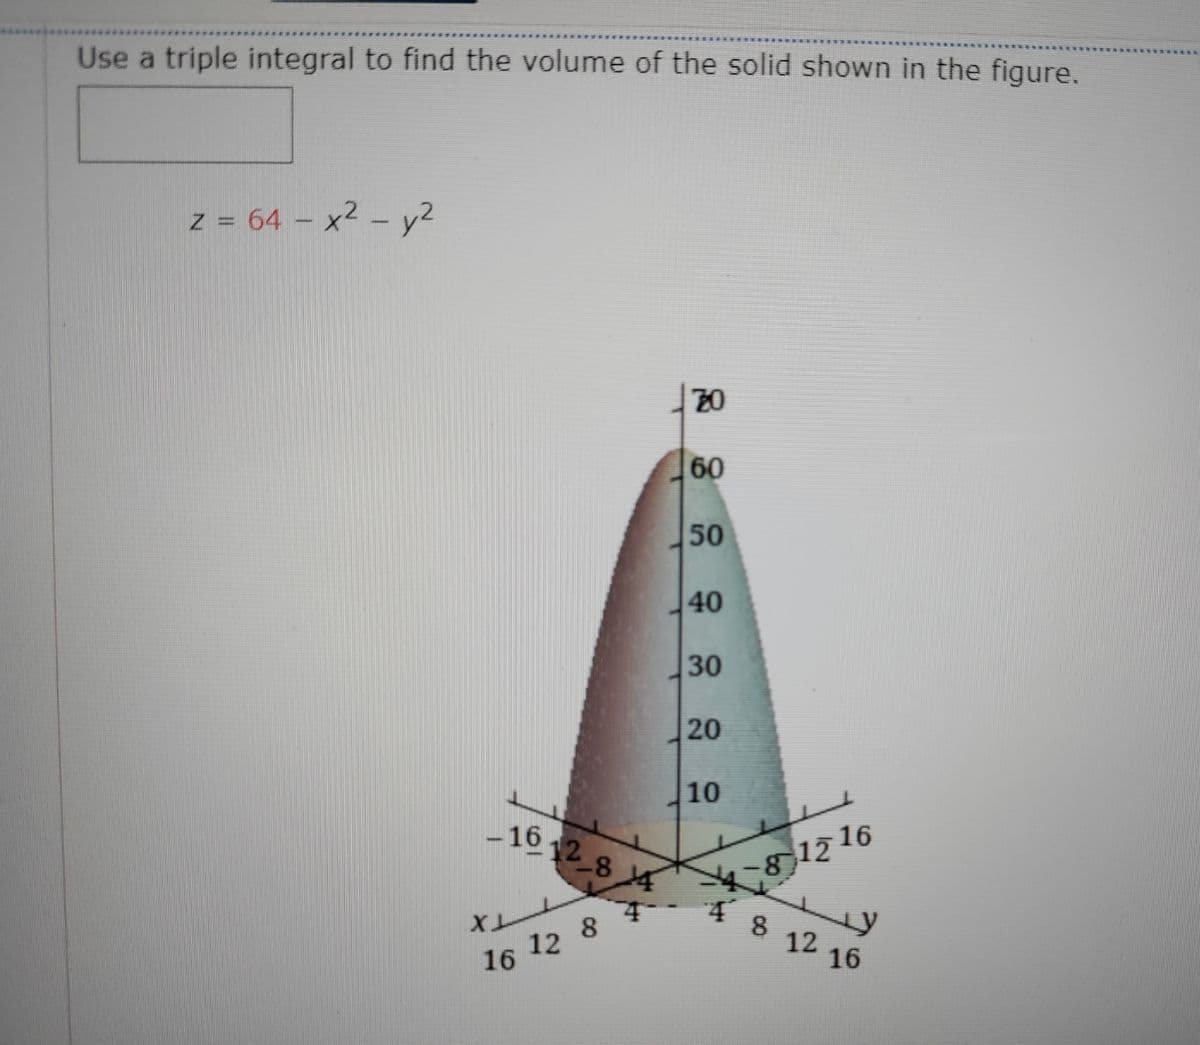 Use a triple integral to find the volume of the solid shown in the figure.
z = 64 – x² - y2
20
60
50
40
30
20
10
-1612 8 4
12 16
8
12 16
TTX
16 12 8
